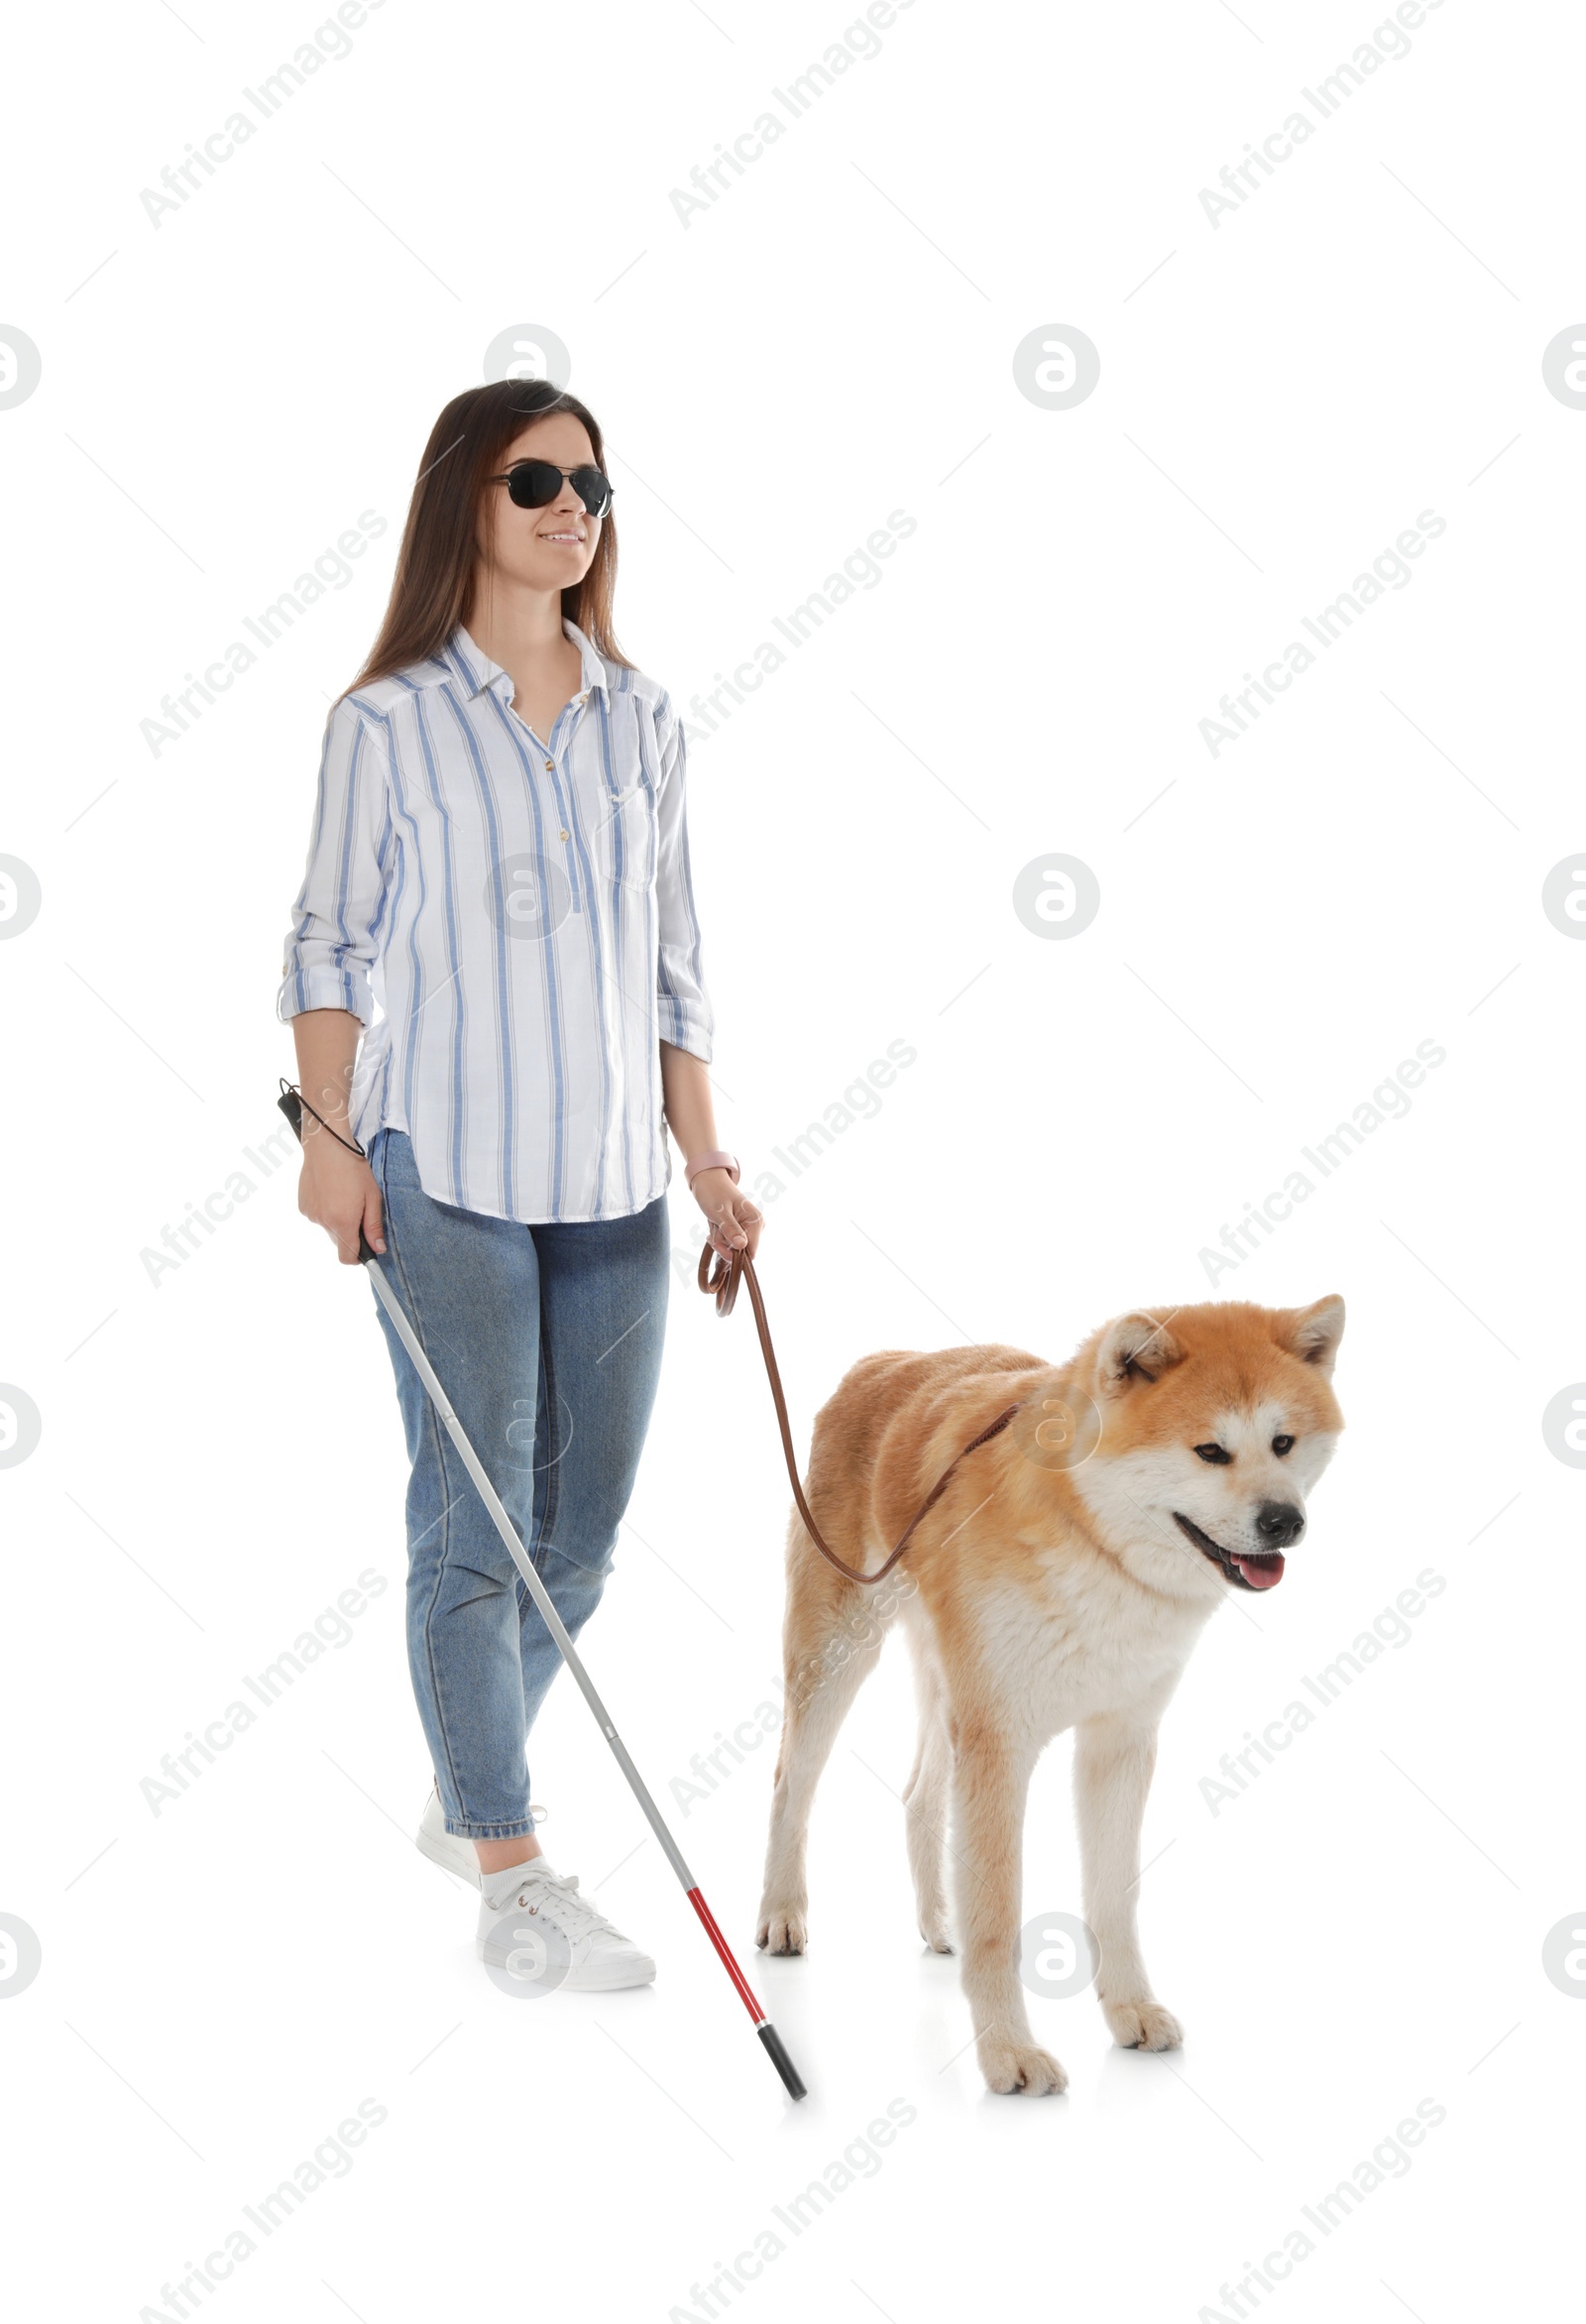 Photo of Blind woman with walking stick and dog on leash against white background